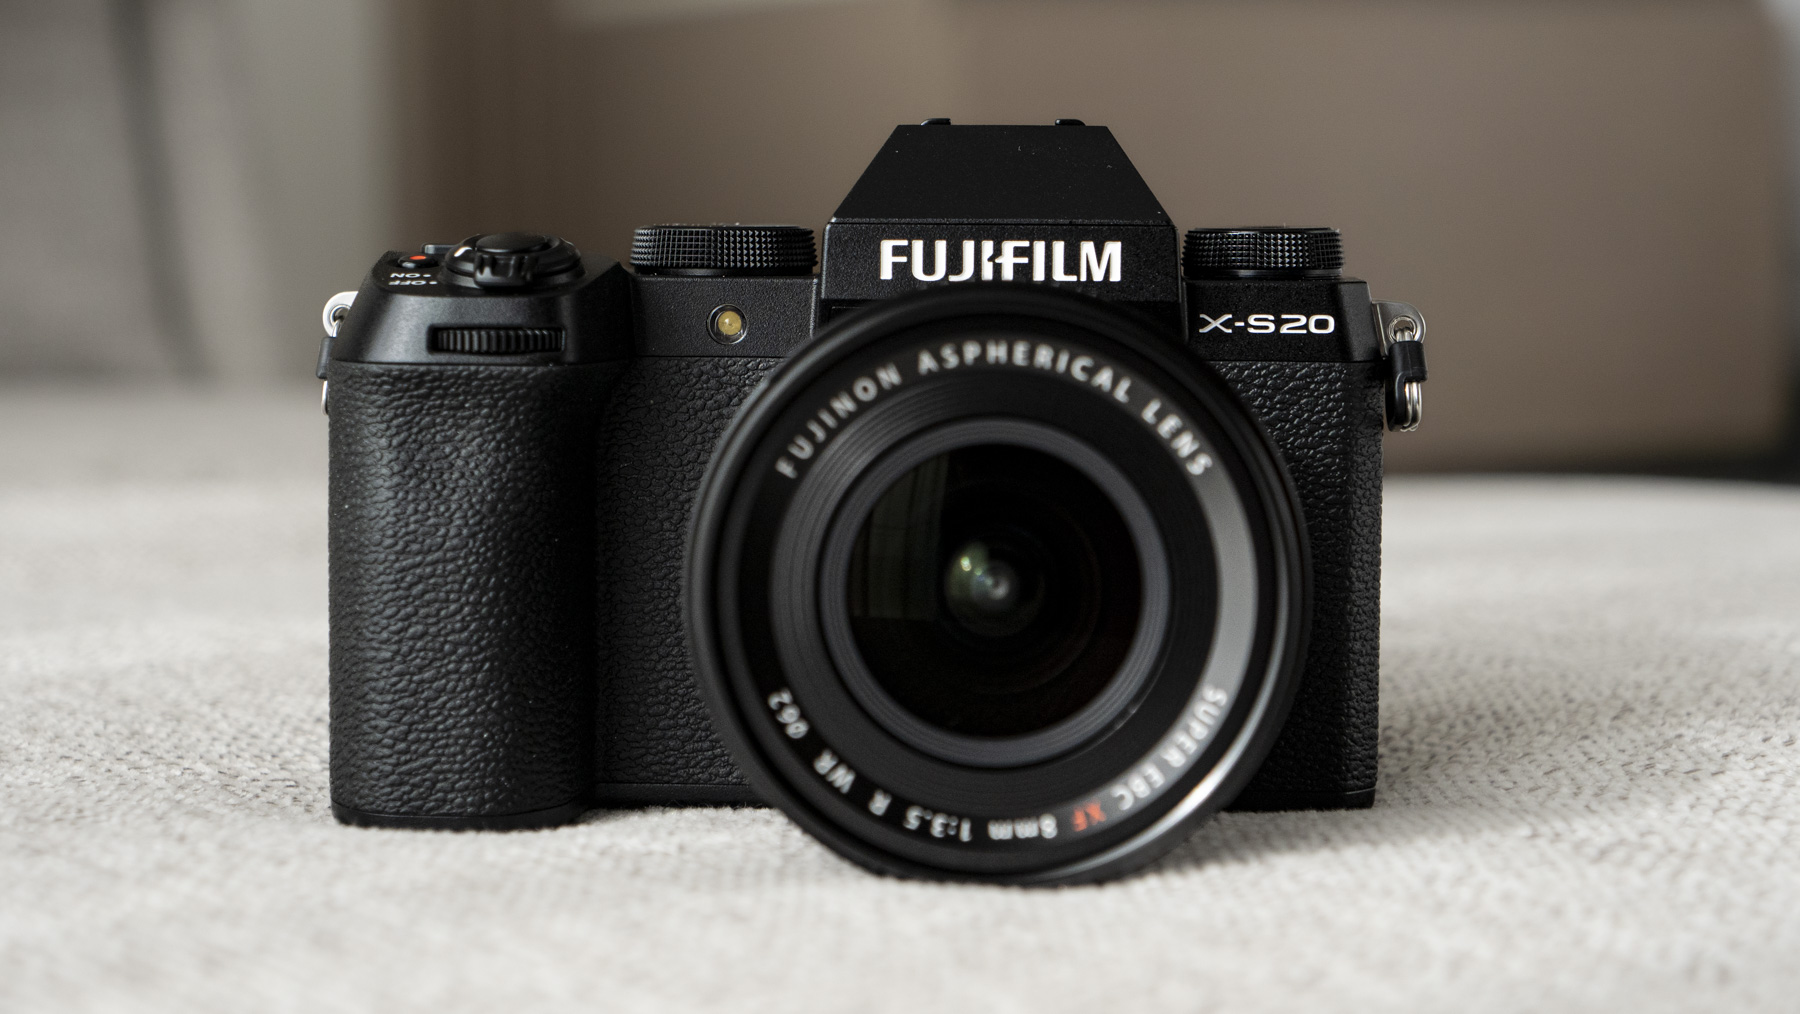 Fujifilm X-S20 camera front with 8mm F3.5 lens attached